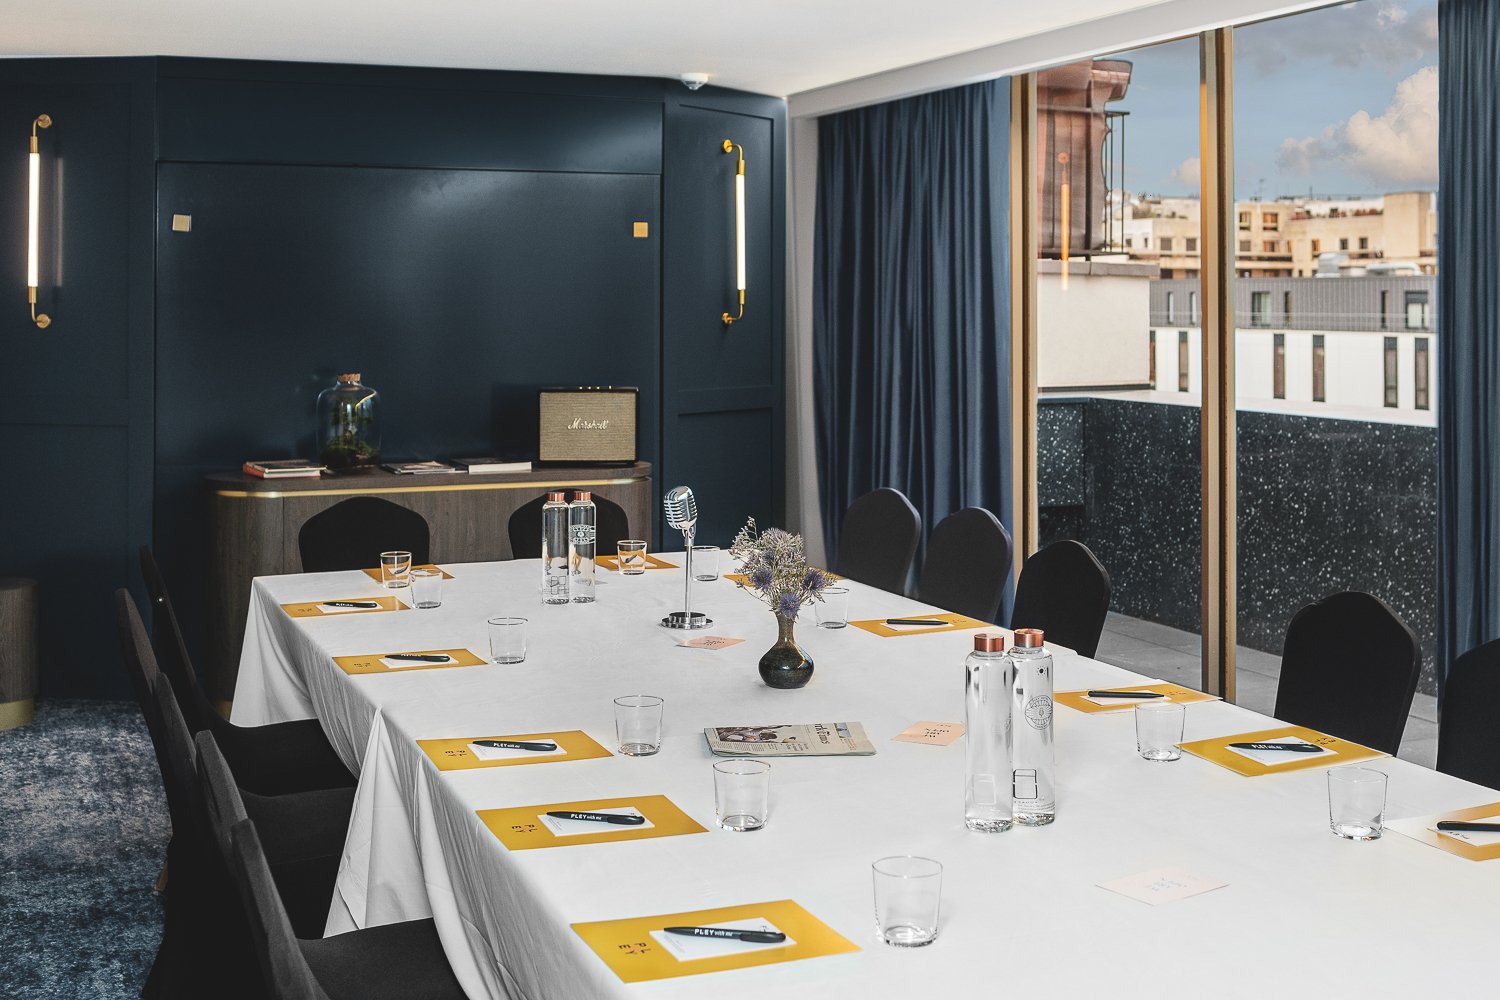 Pley Hotel meetings and events studio